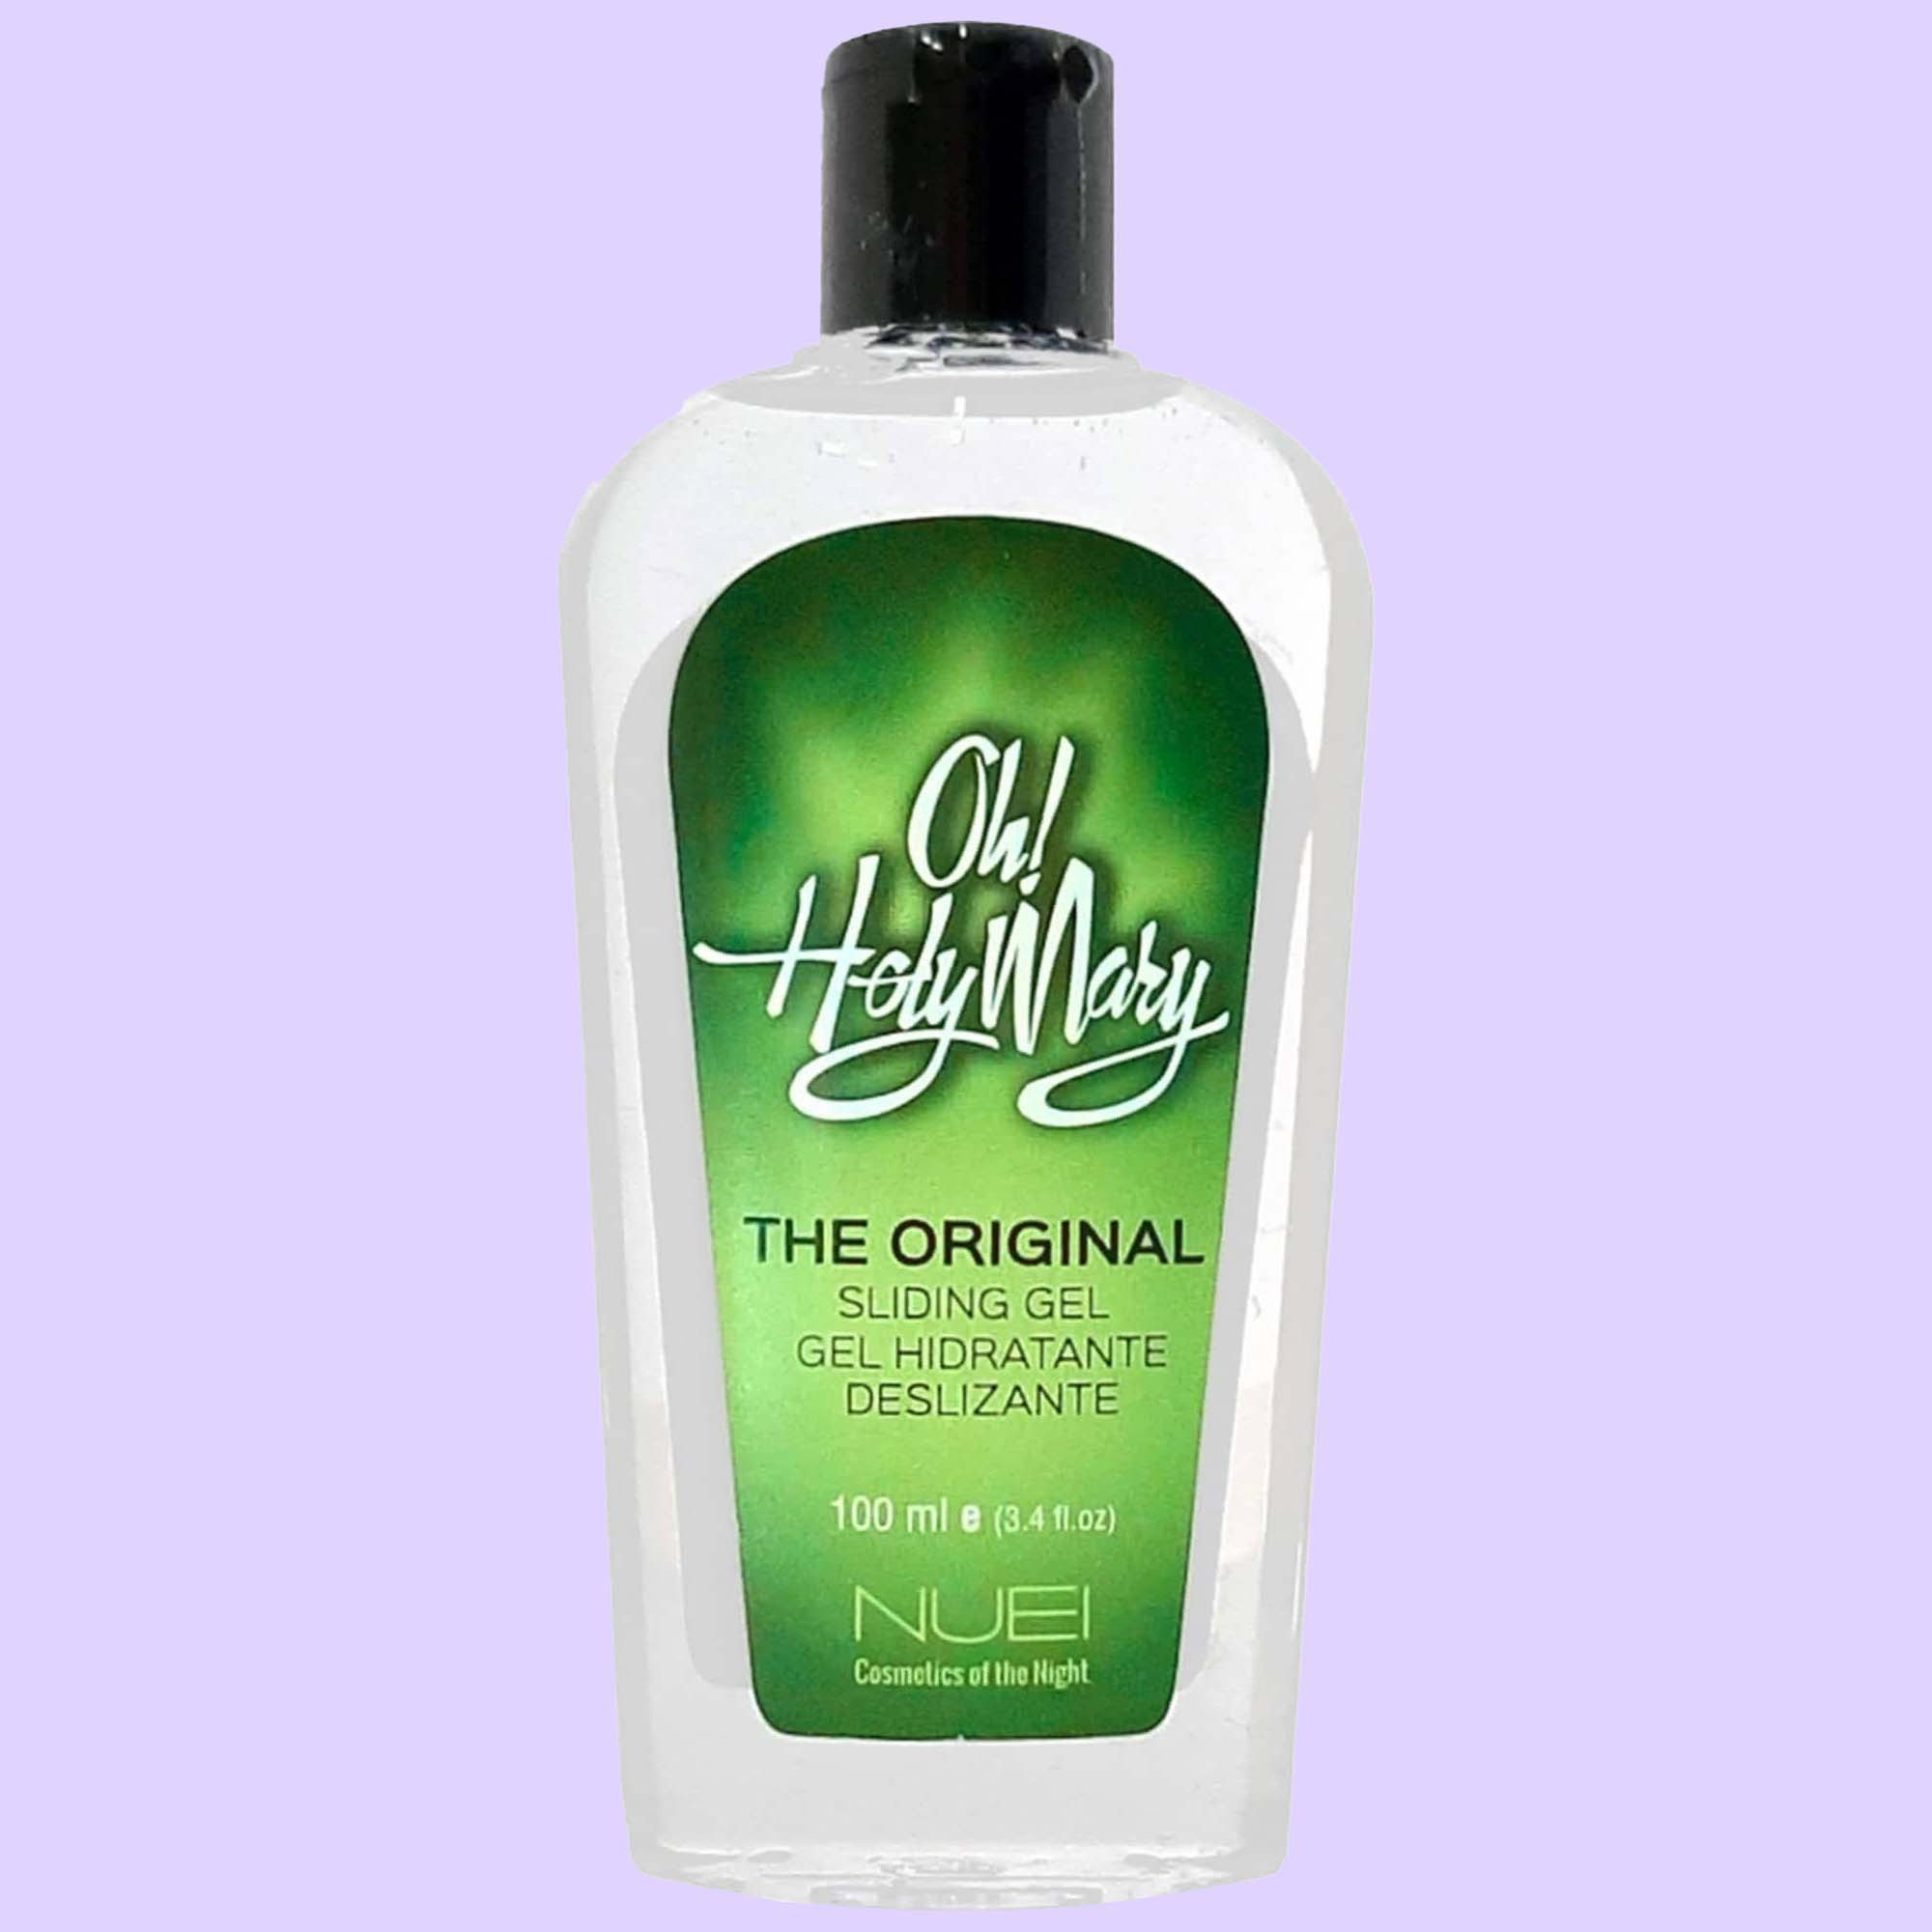 OH! Holy Mary The Original Sliding Gel Lubricant